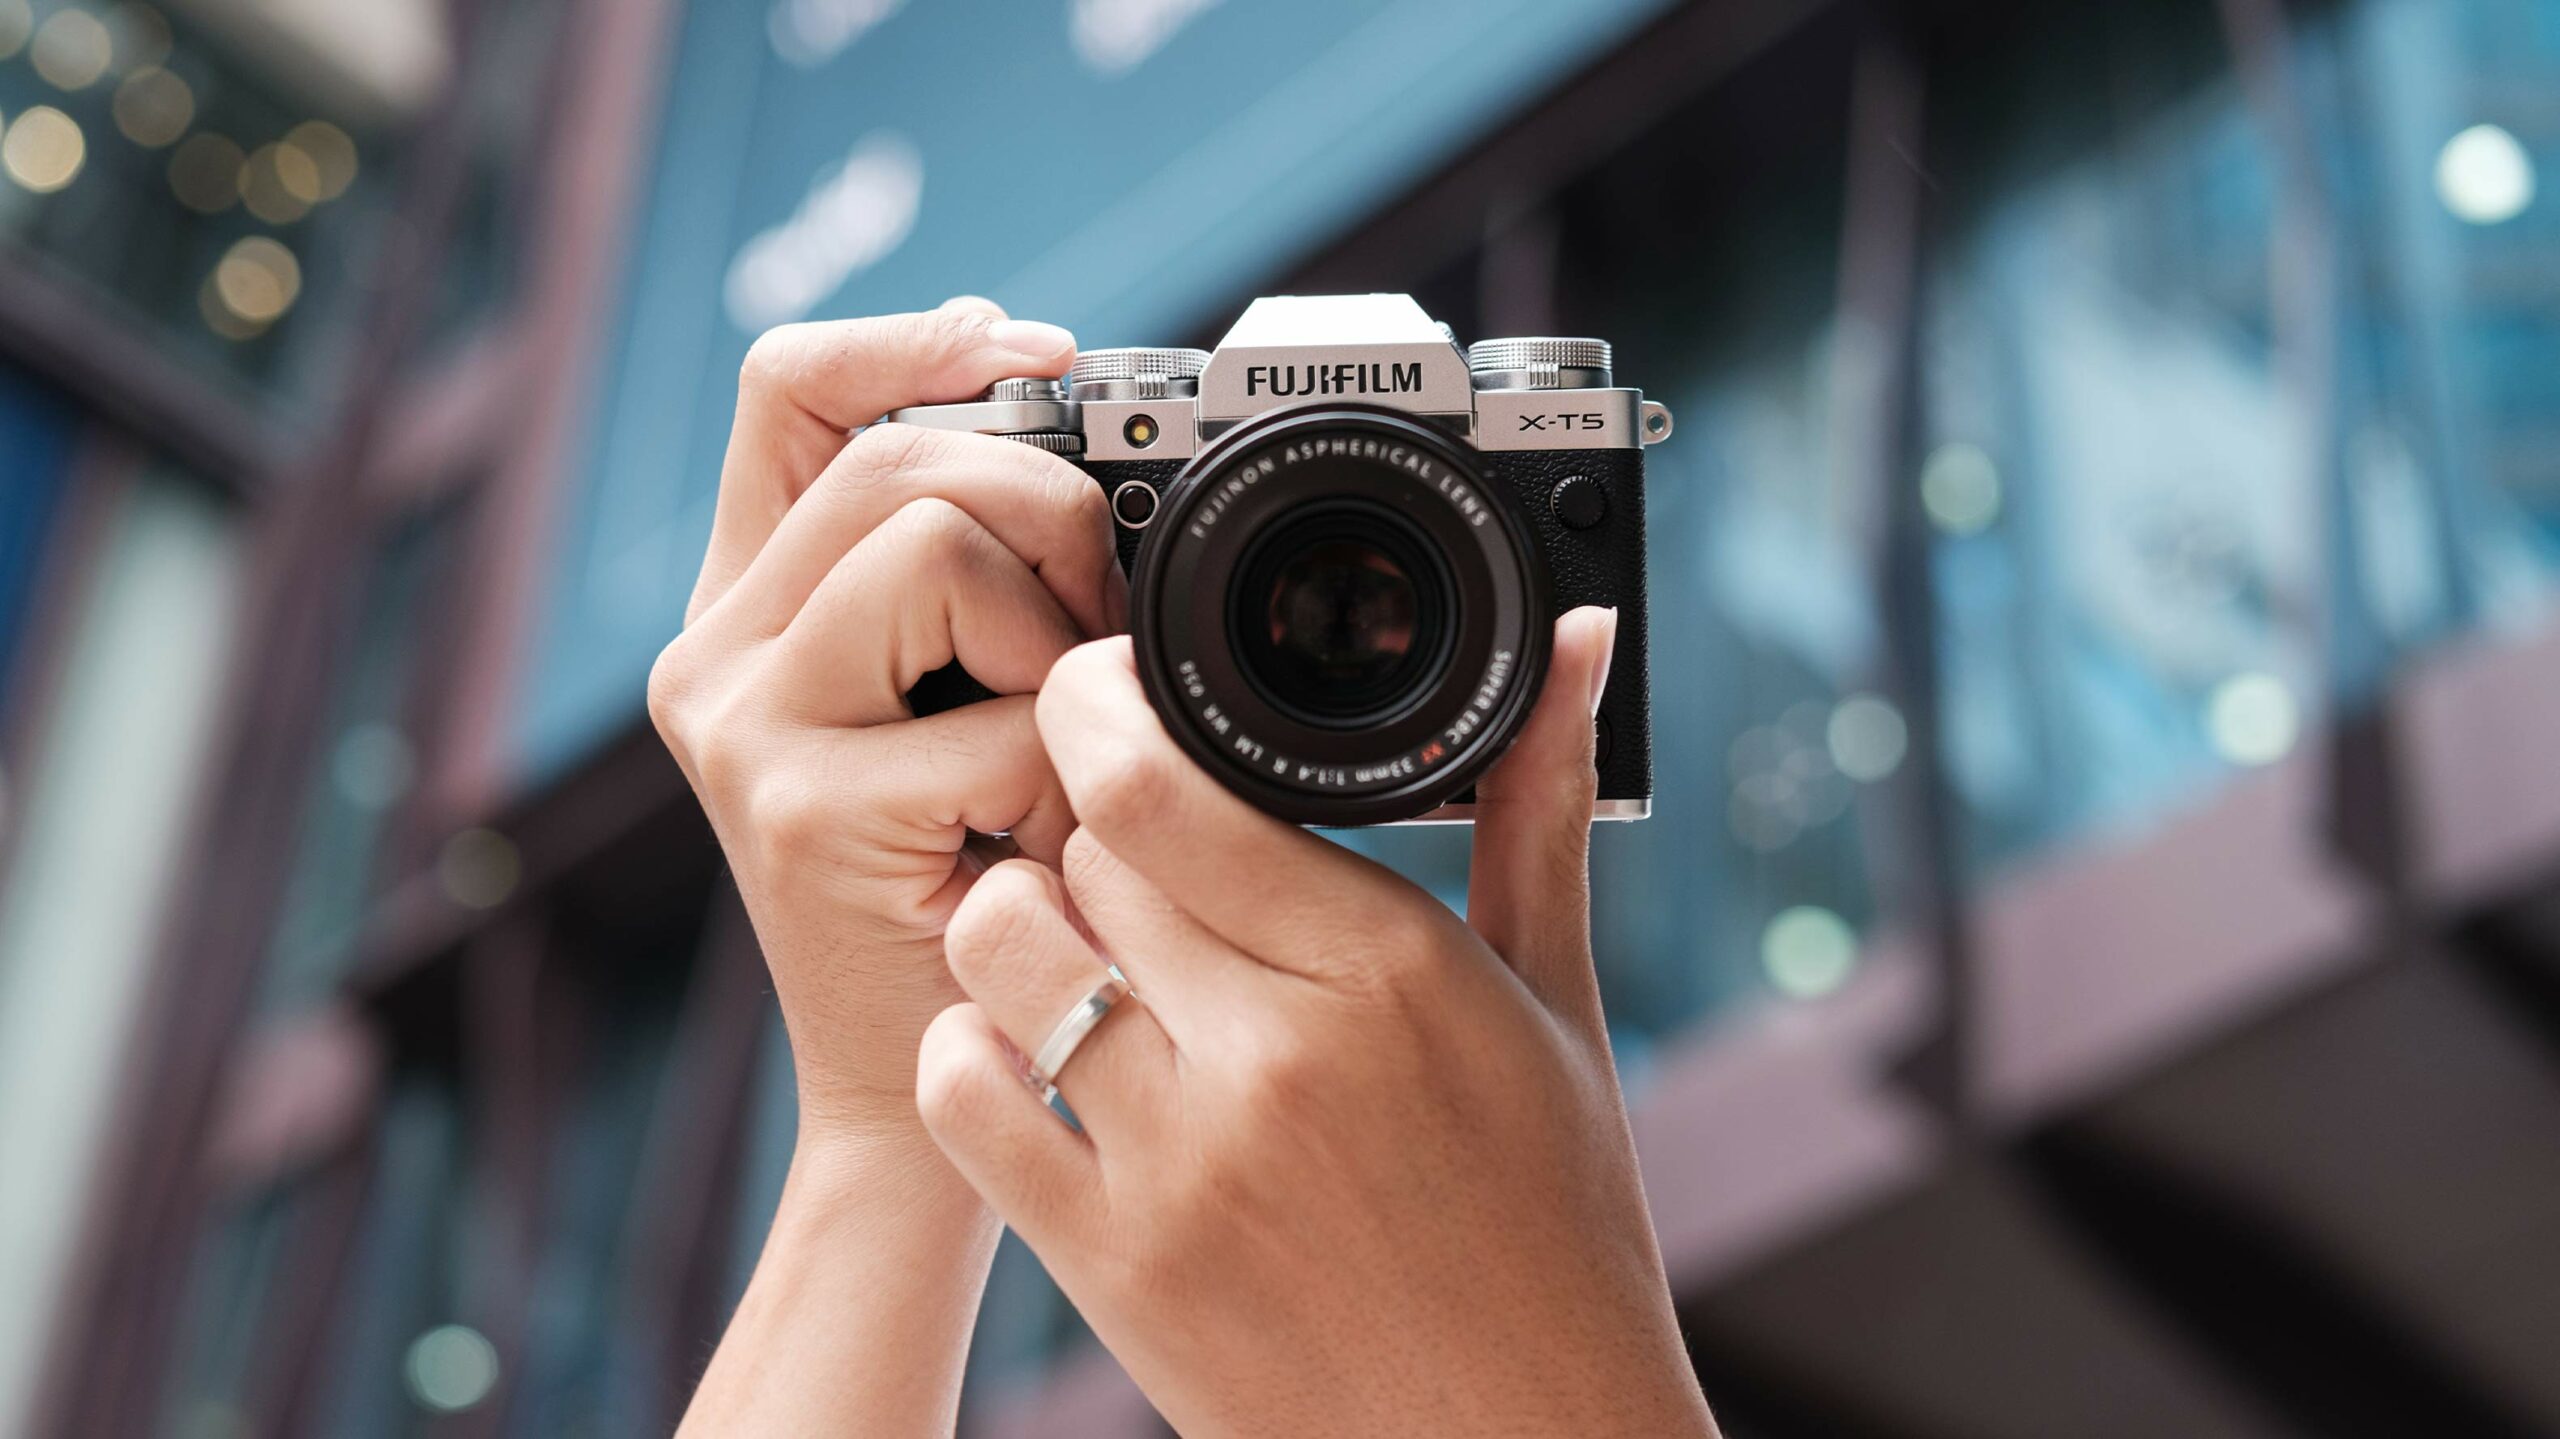 Fujifilm’s X-T5 is a return to form for photographers